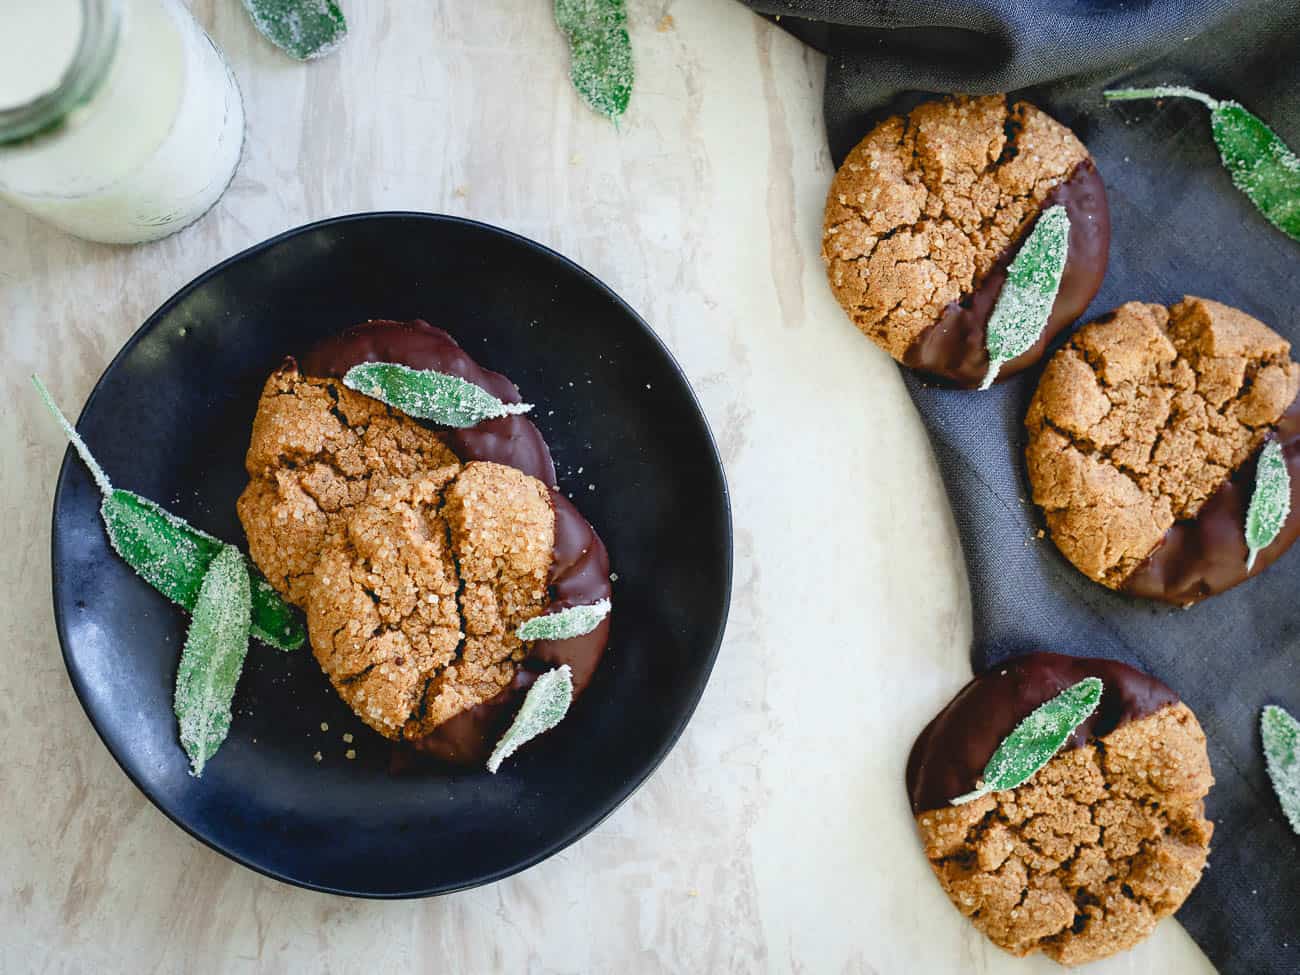 These flourless cashew almond butter cookies are soft, chewy and full of festive fun with their candied sage garnish.